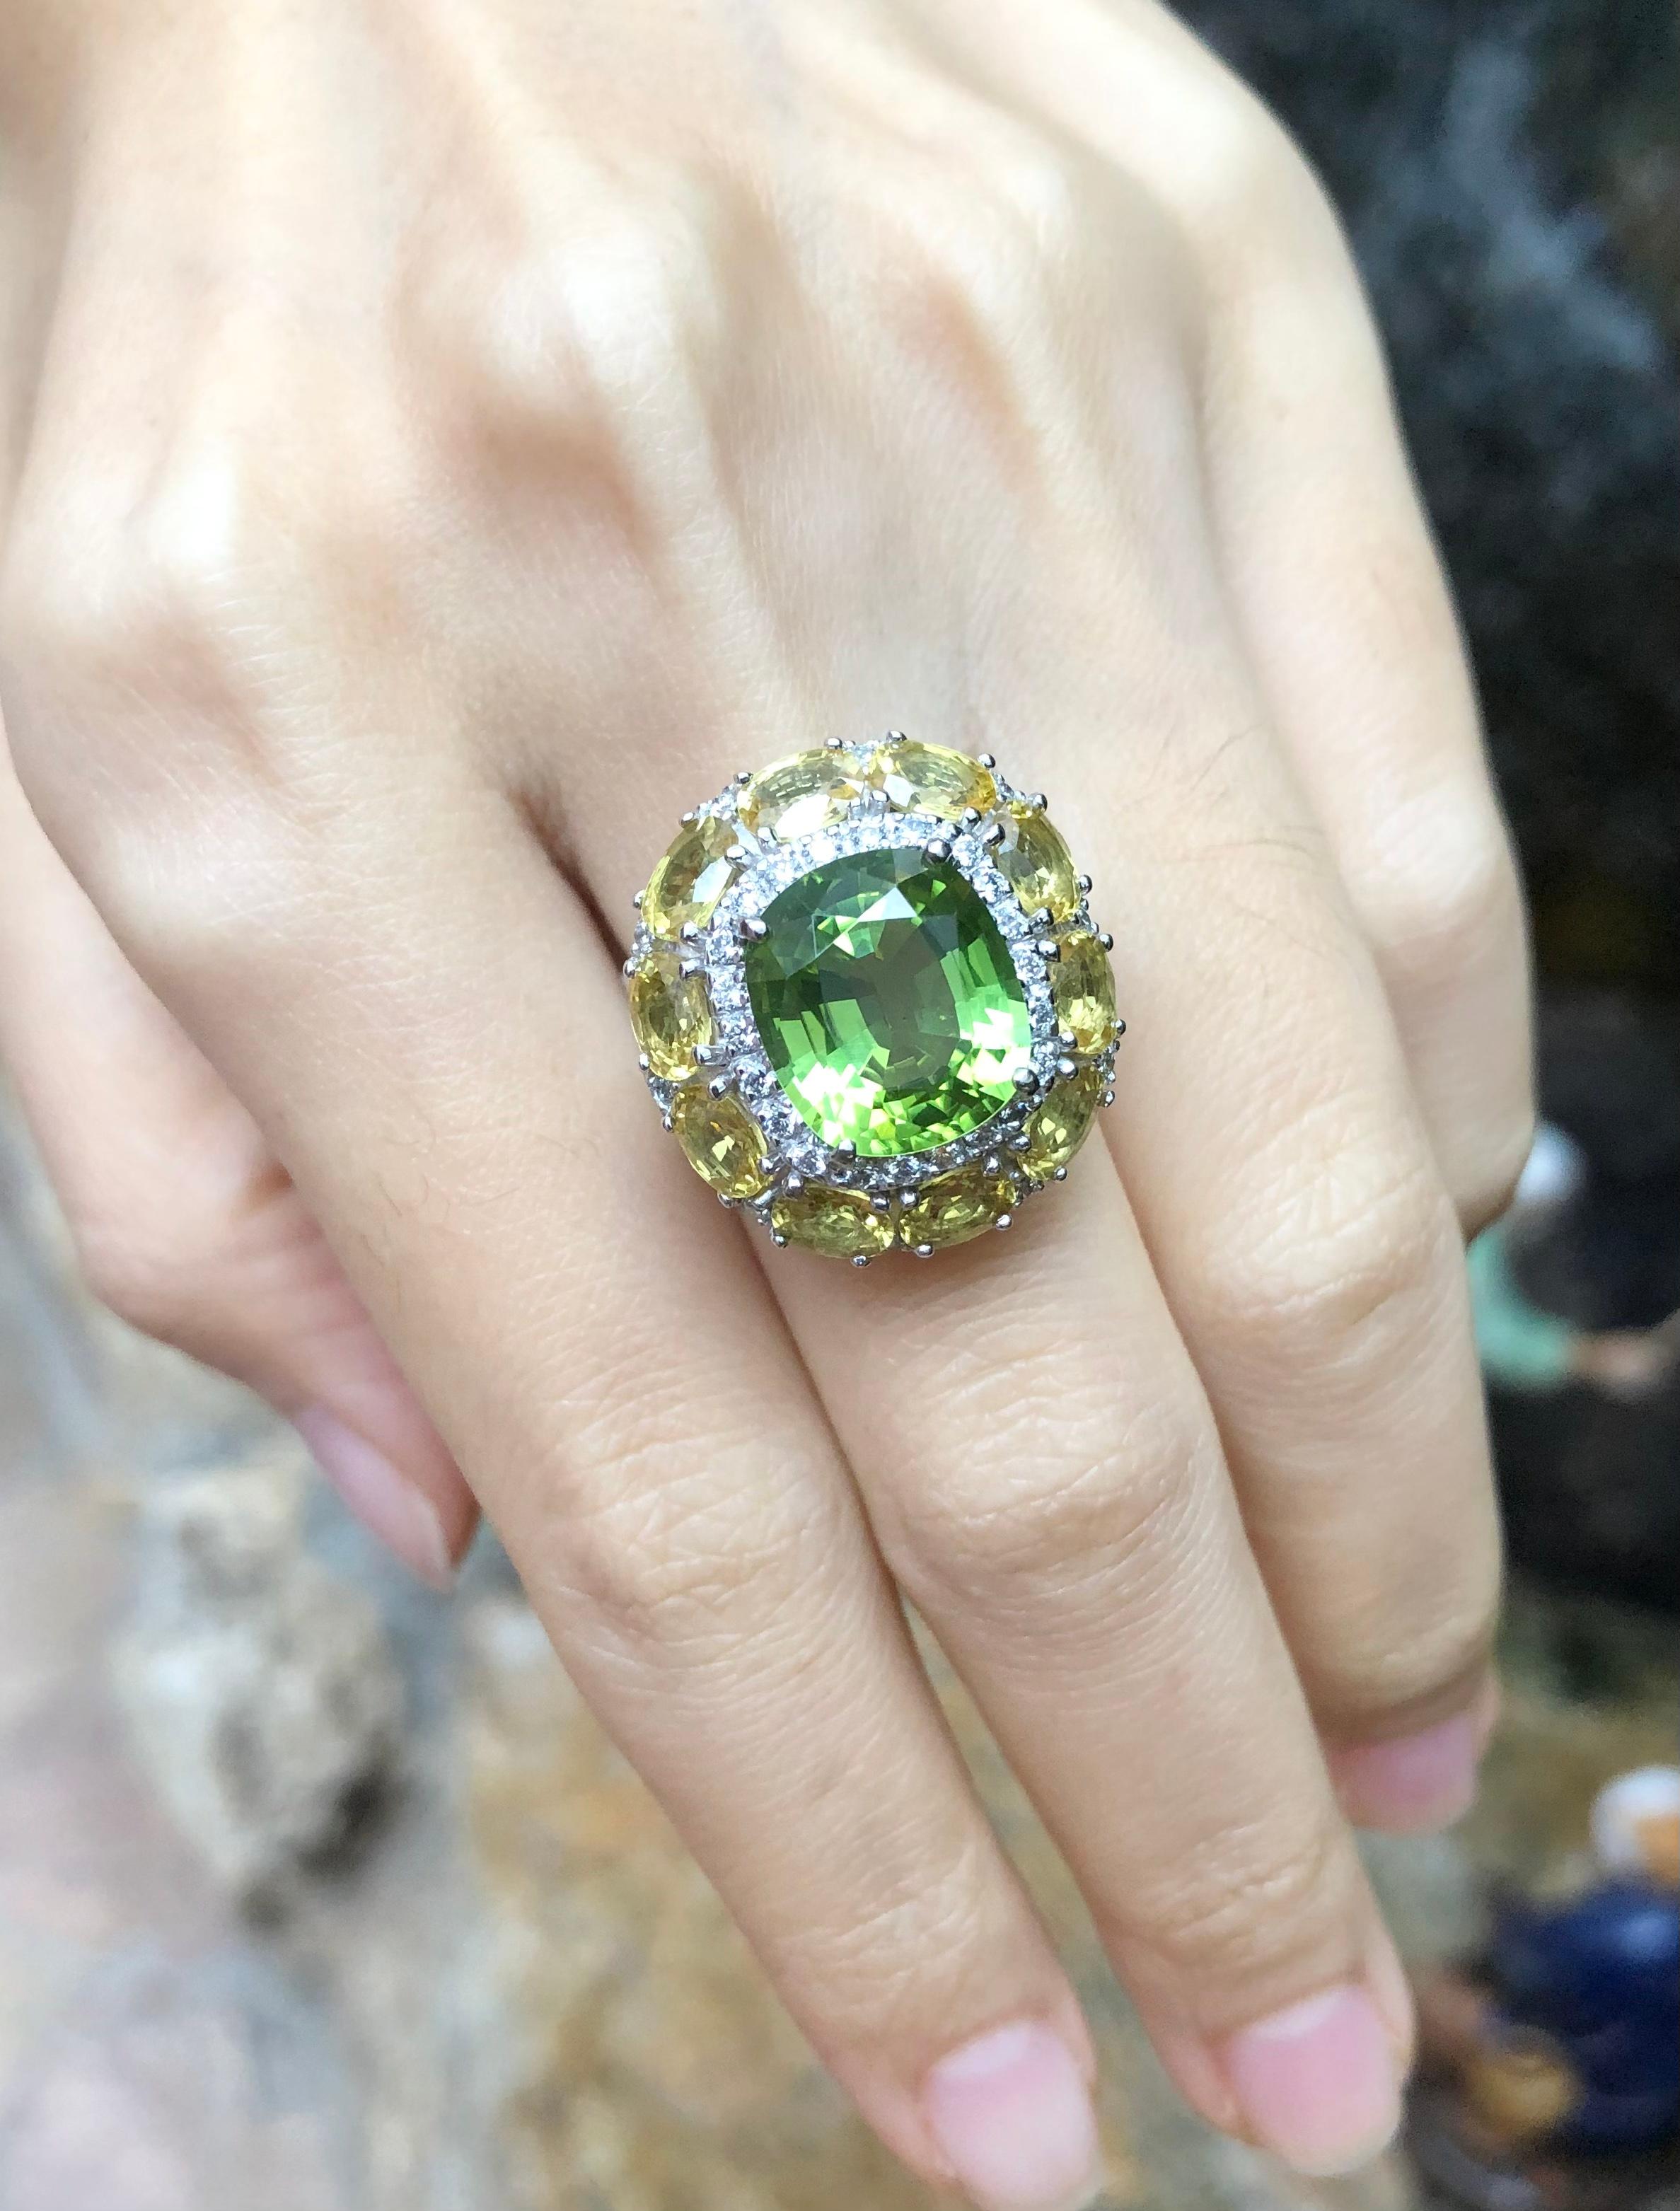 Peridot 5.77 carats, Yellow Sapphire 6.75 carats with Diamond 0.90 carat Ring set in 18 Karat White Gold Settings

Width:  2.0 cm 
Length: 2.1 cm
Ring Size: 52
Total Weight: 14.82 grams

Peridot
Width:  0.9 cm 
Length: 1.0 cm

